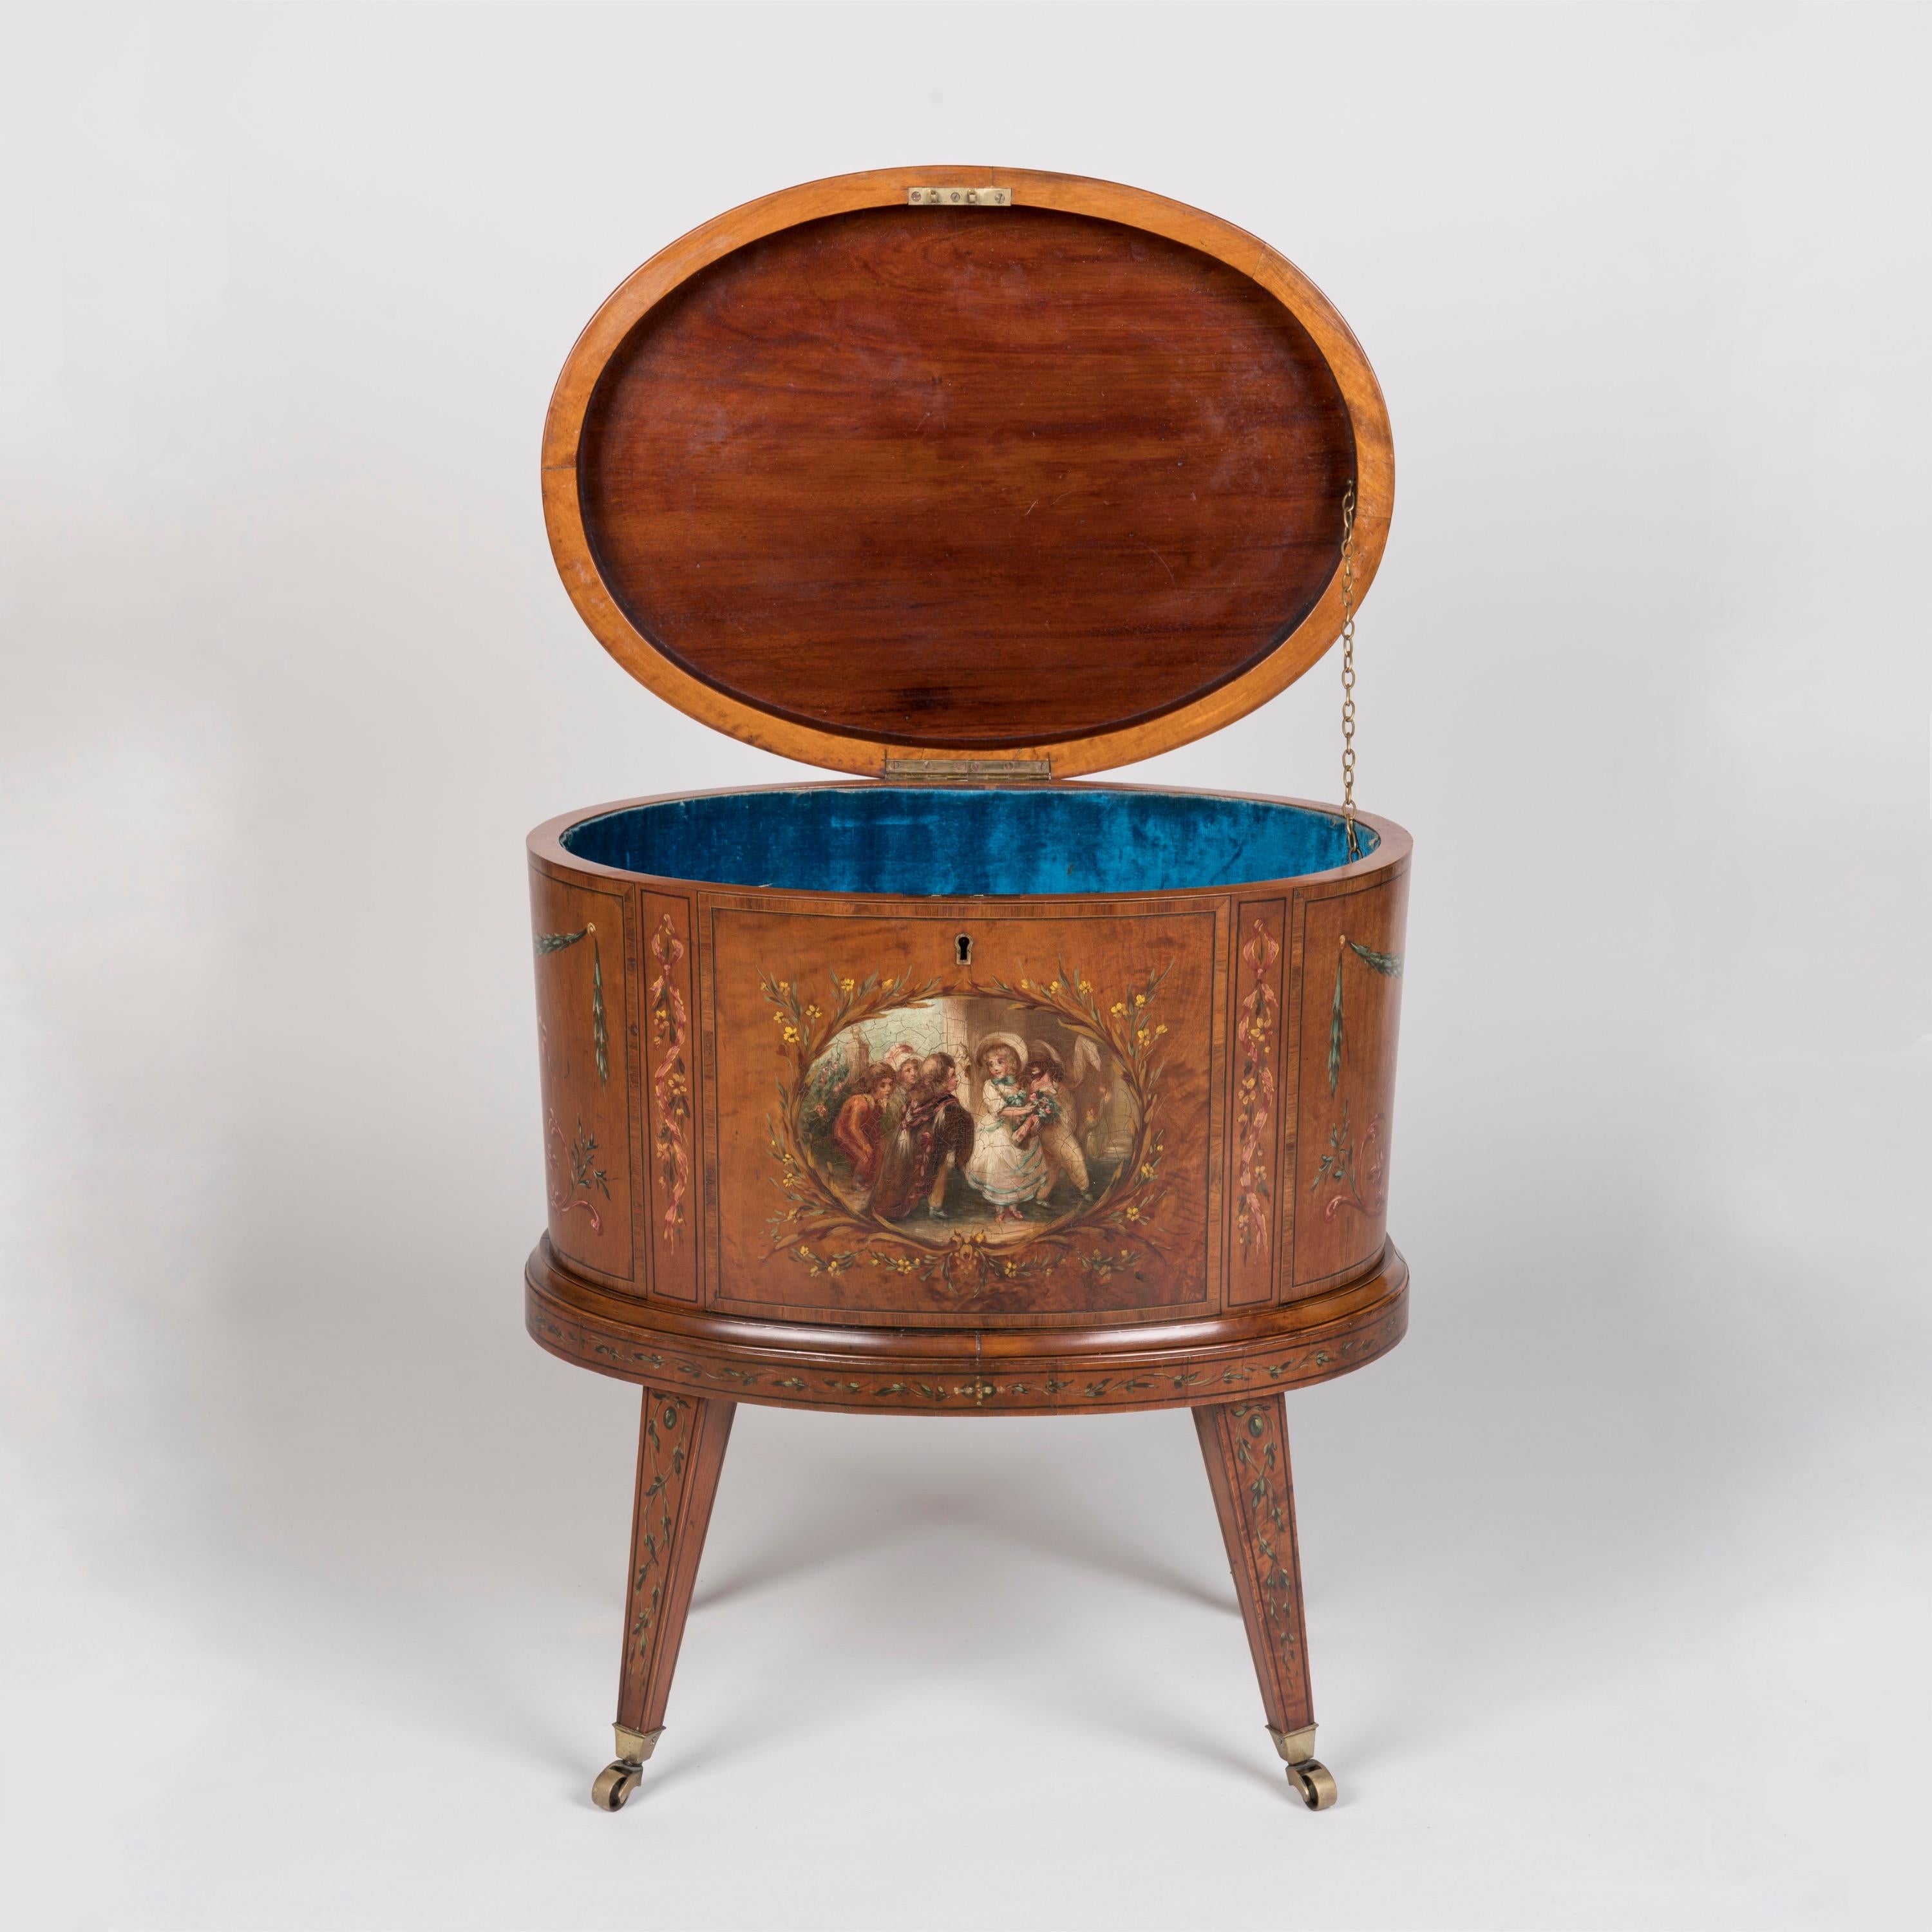 English Rare Pair of 19th Century Neoclassical Hand-Painted Satinwood Wine Coolers For Sale